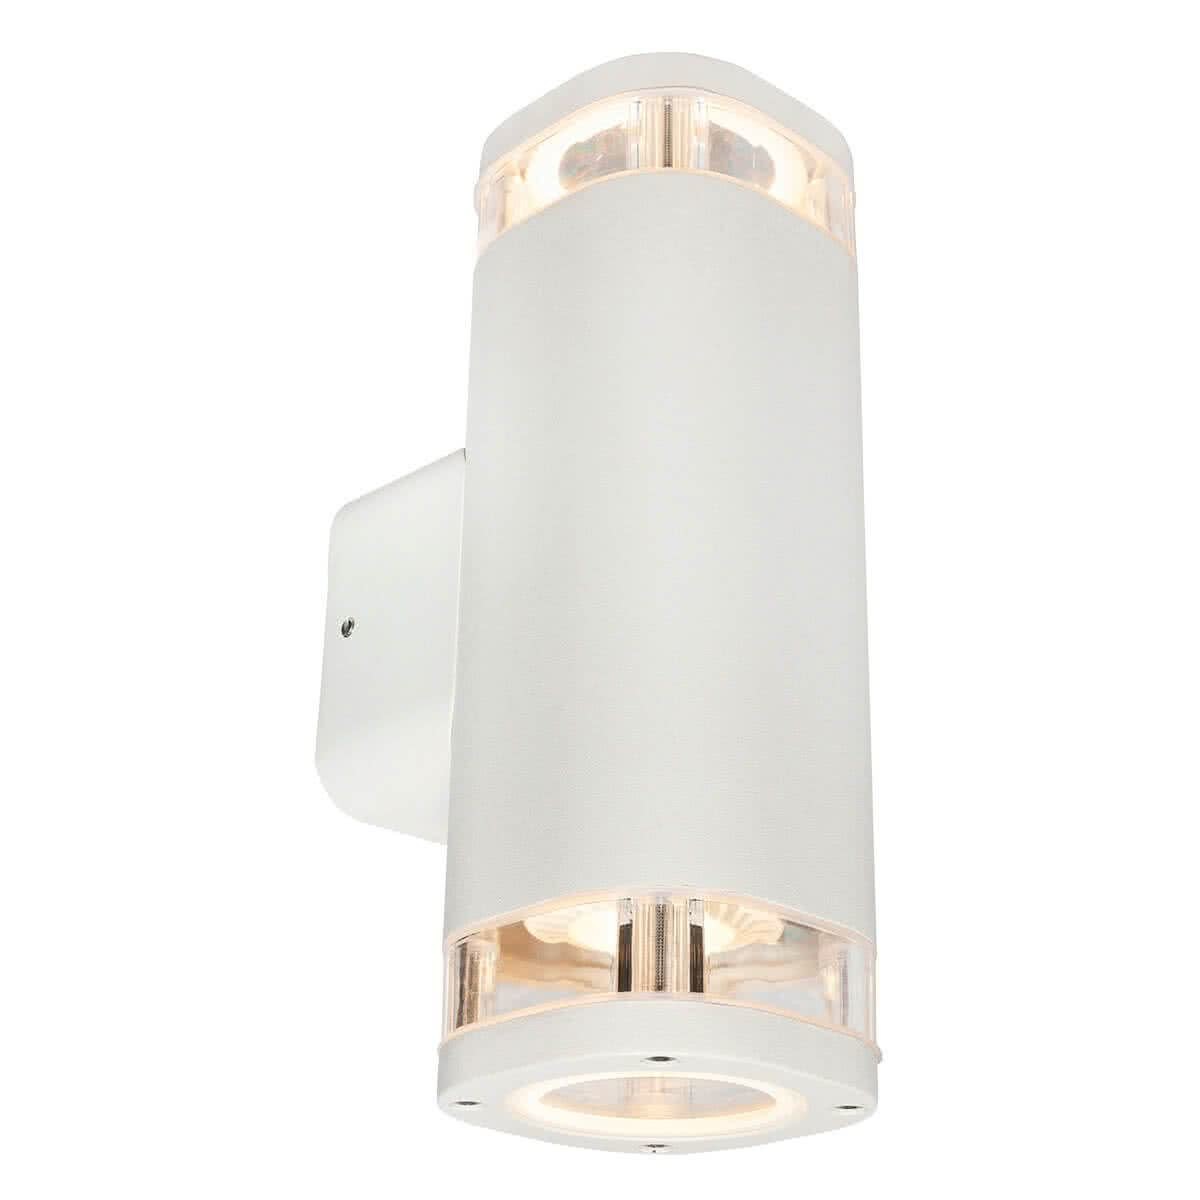 Glenelg Ambient 8w LED Aluminium Up & Down Outdoor Wall Light